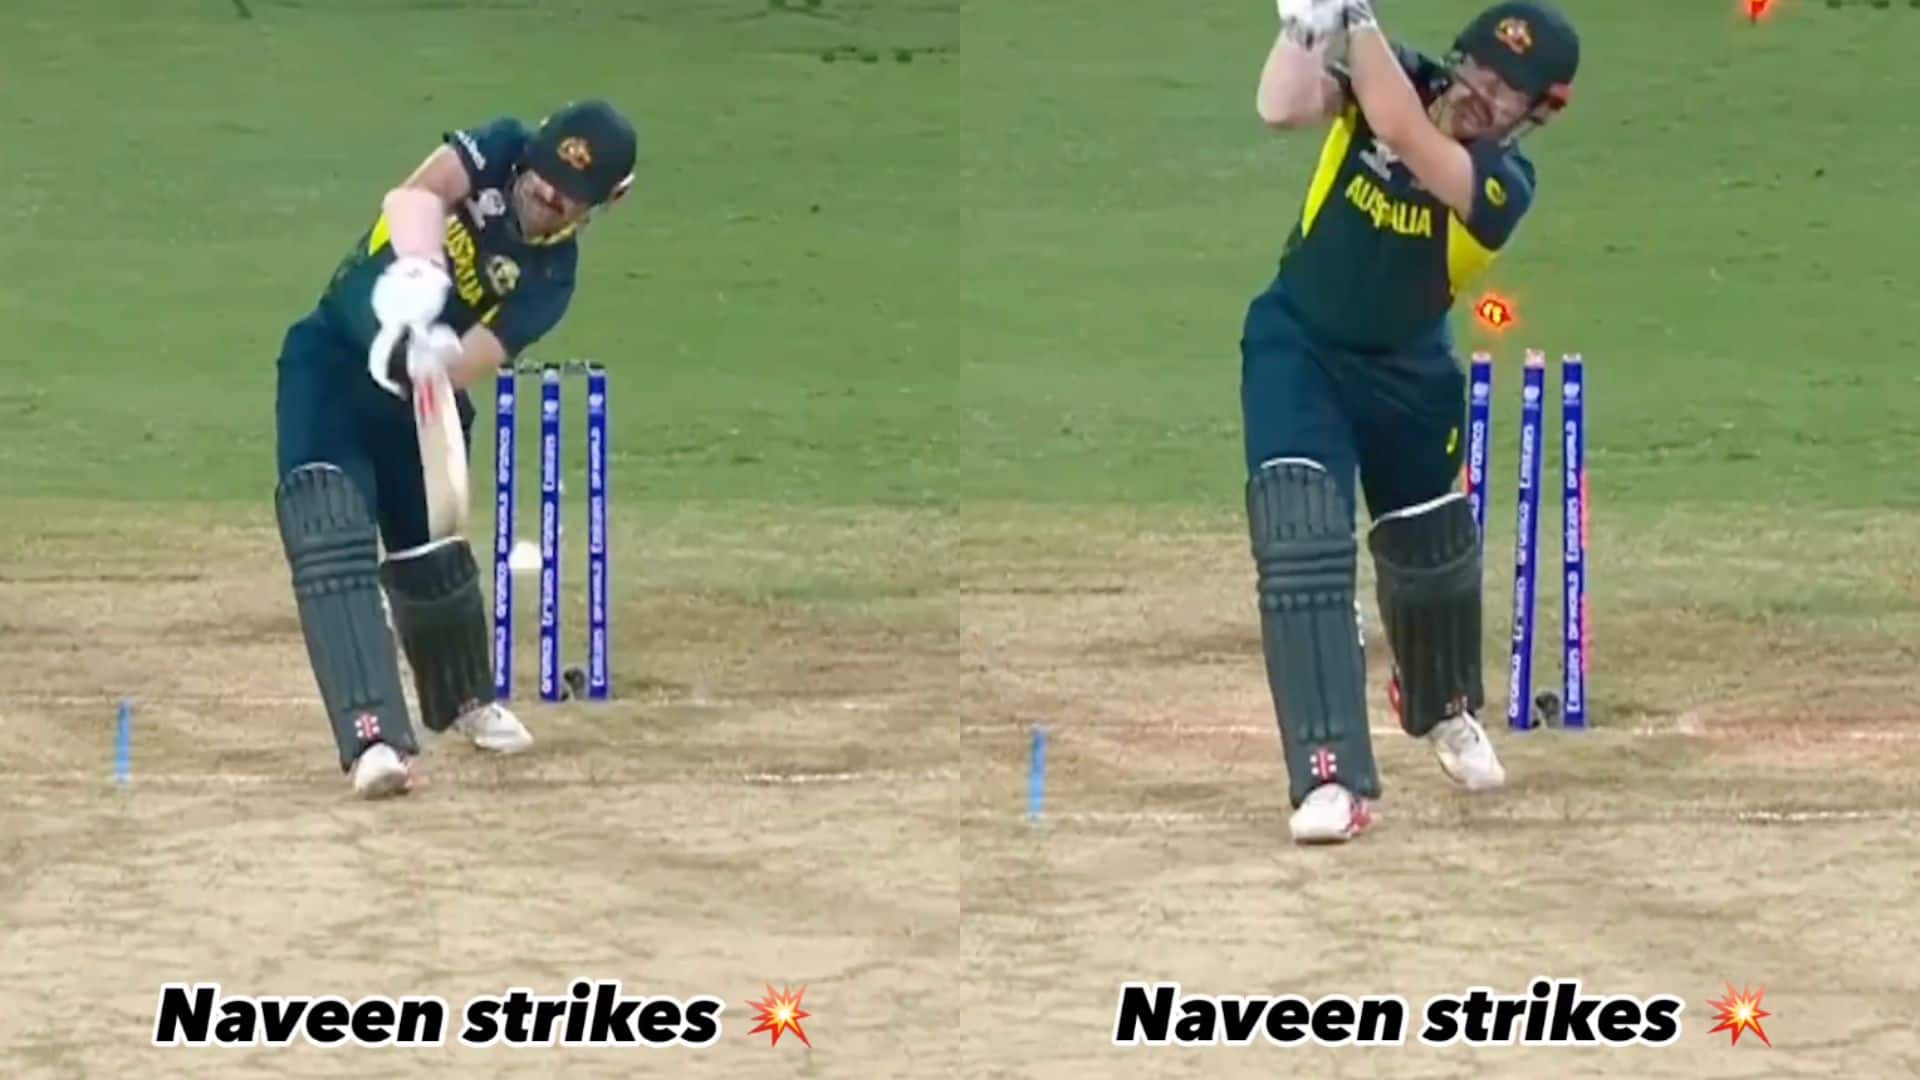 Head was bowled by Naveen [X]